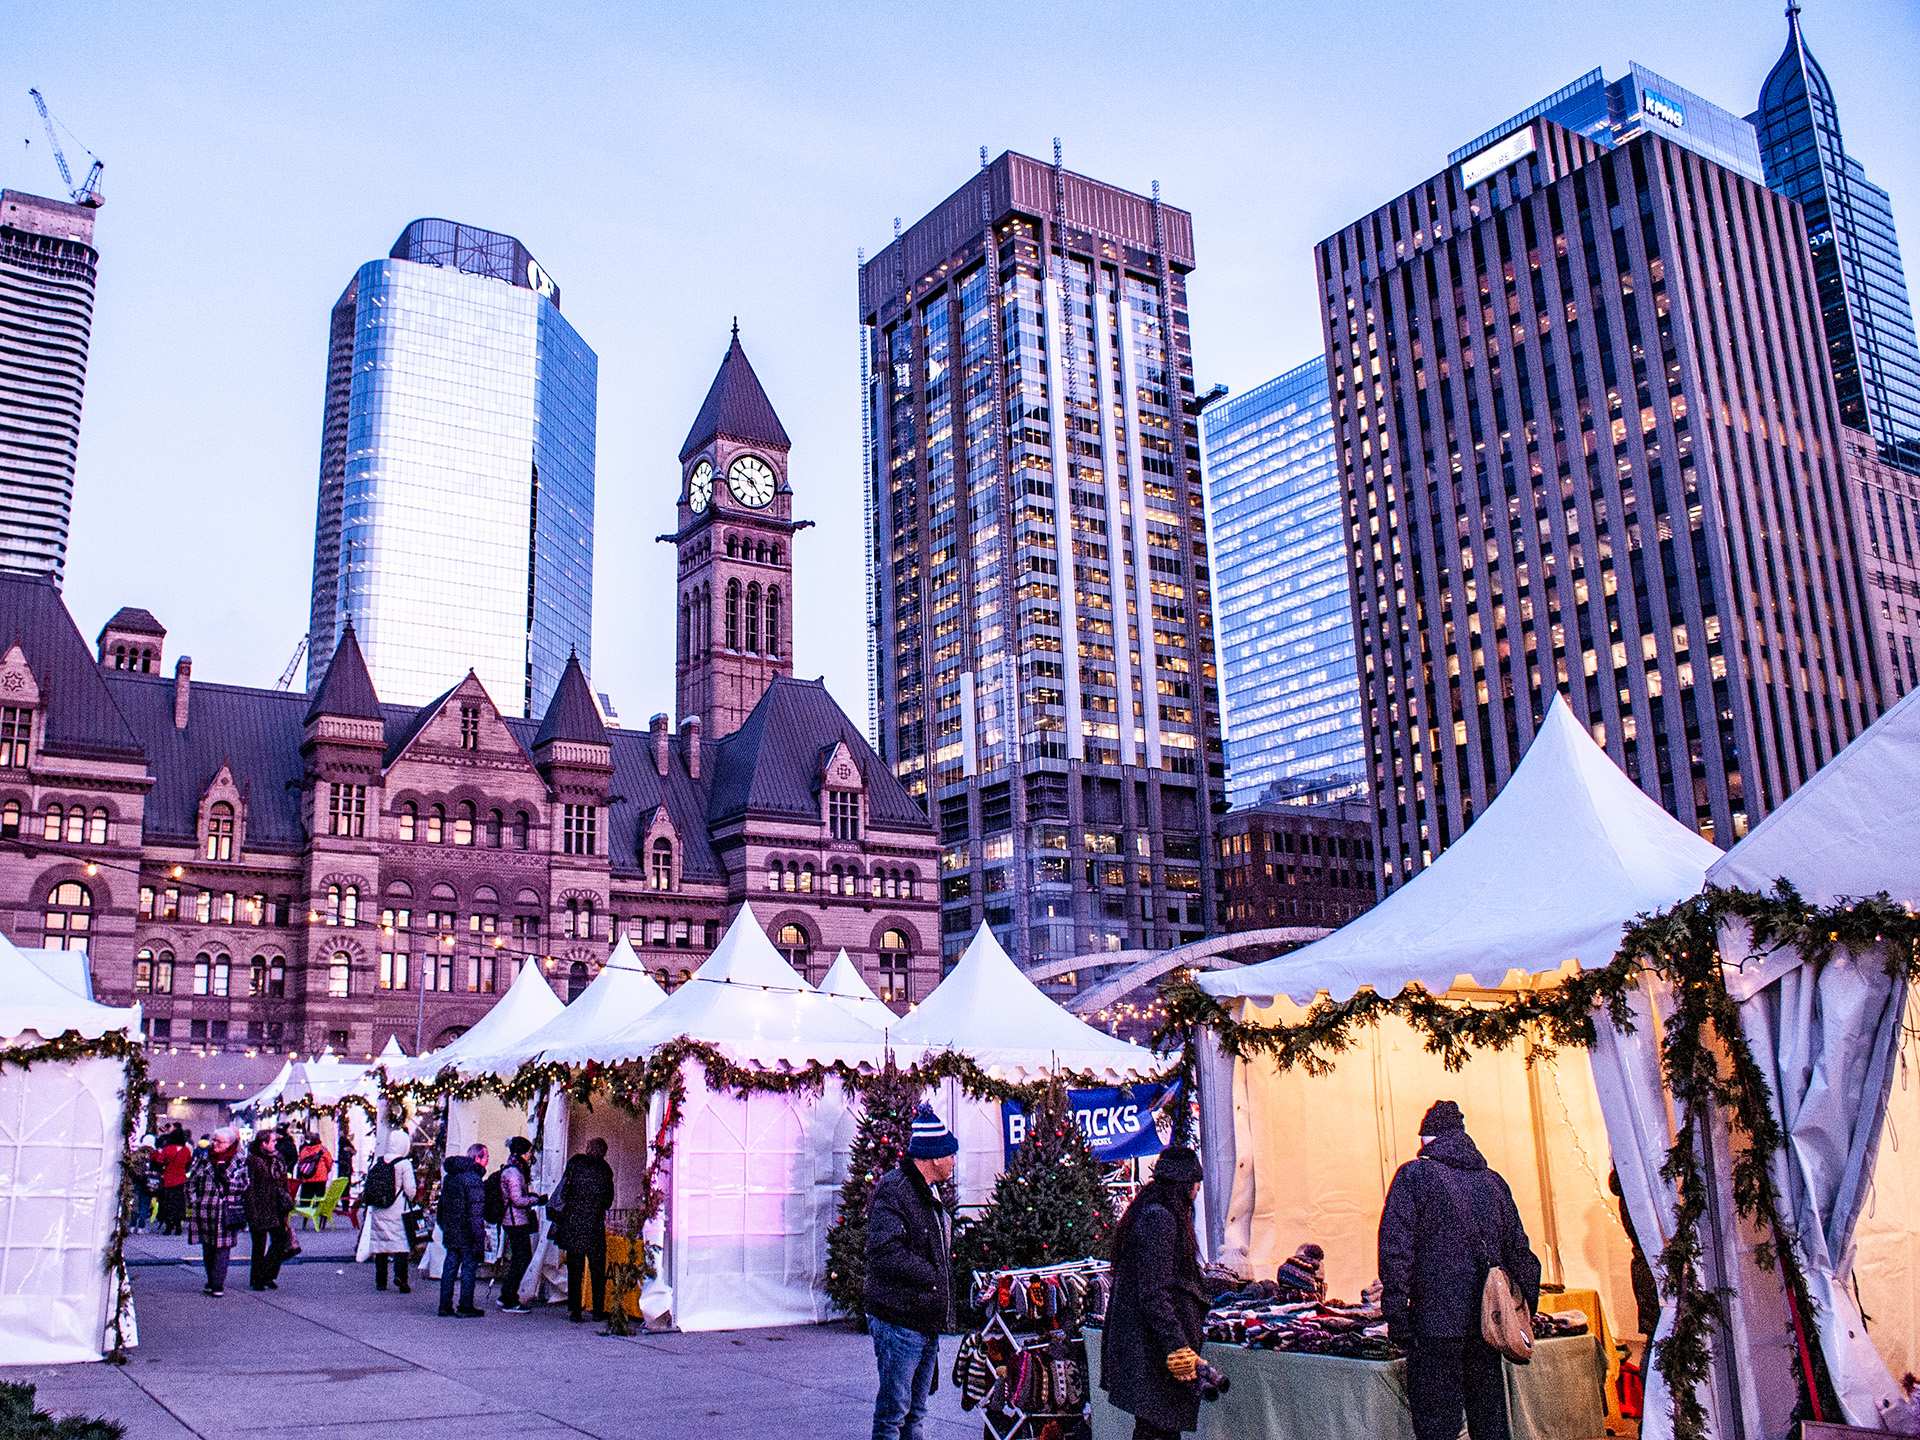 Toronto Christmas market | Market stalls at Fair in the Square at Nathan Philips Square